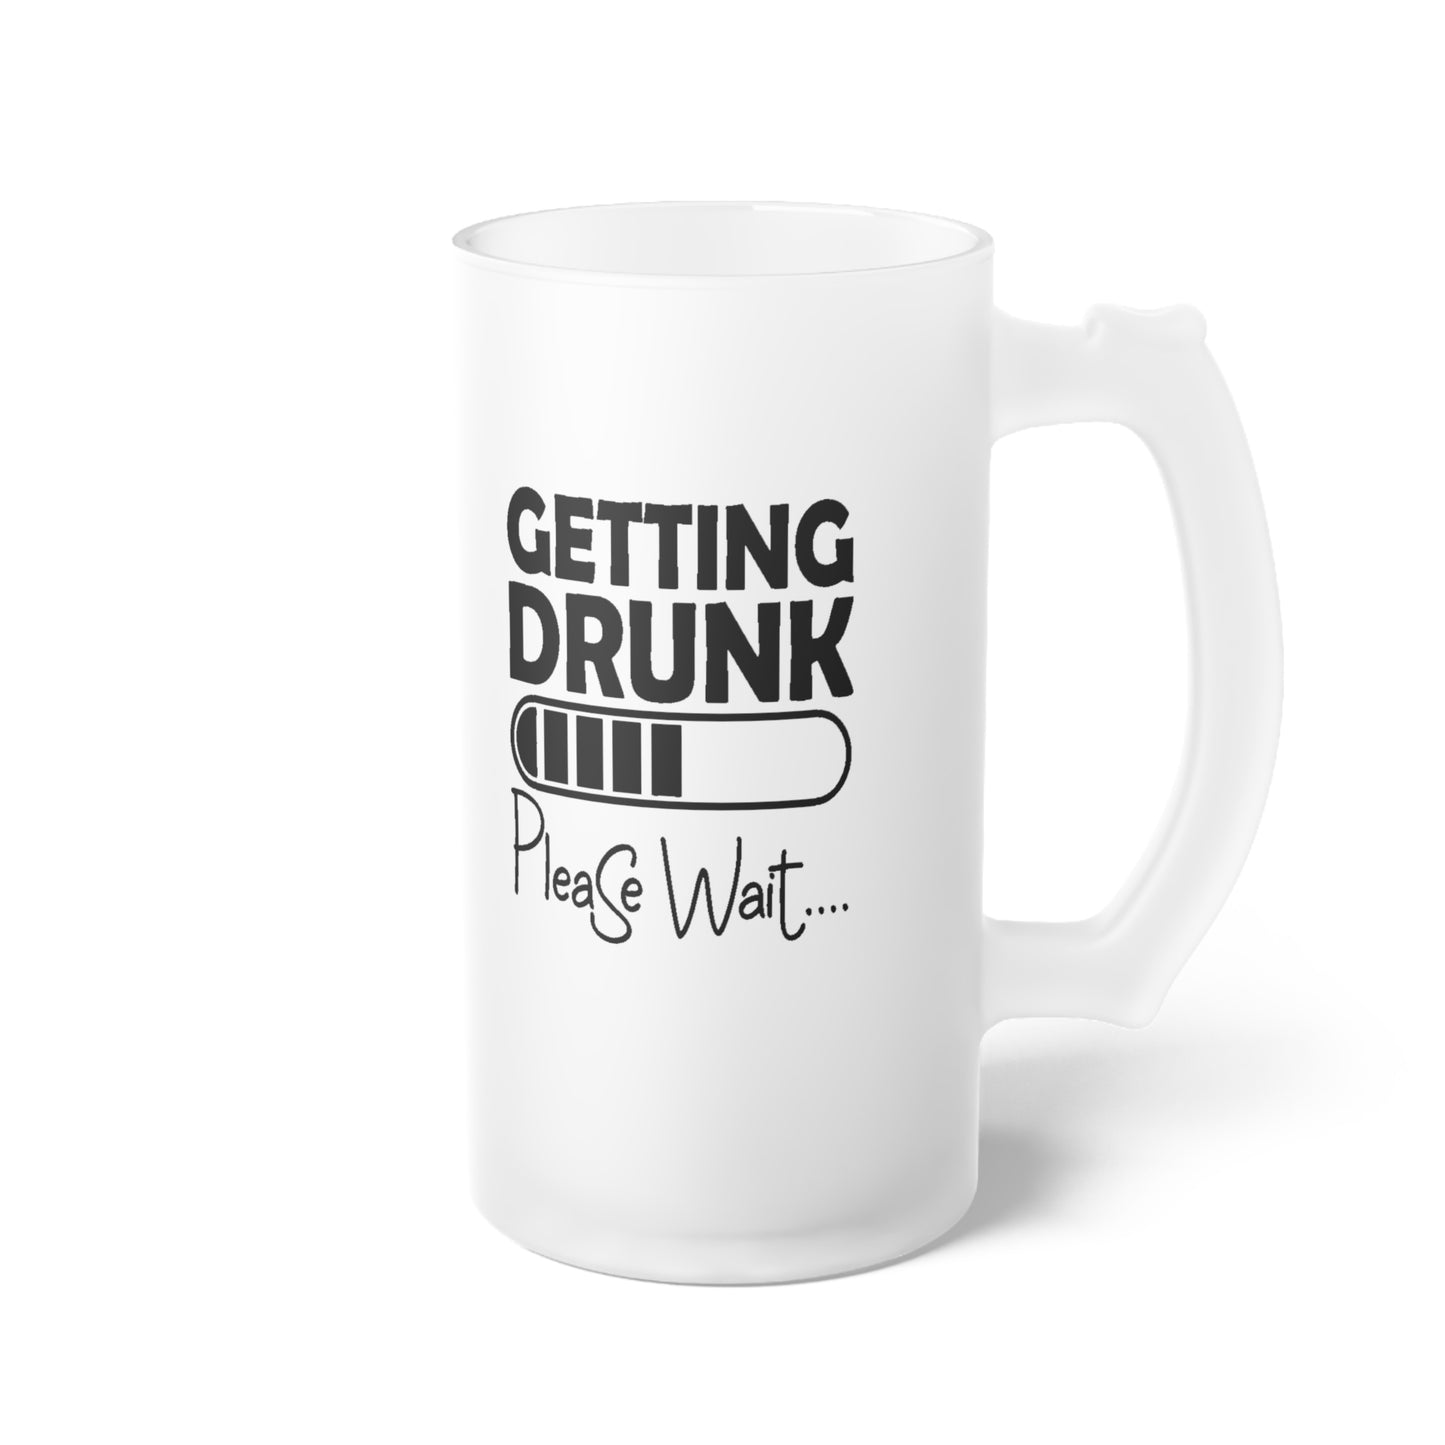 Getting Drunk... Please Wait - Frosted Glass Beer Mug